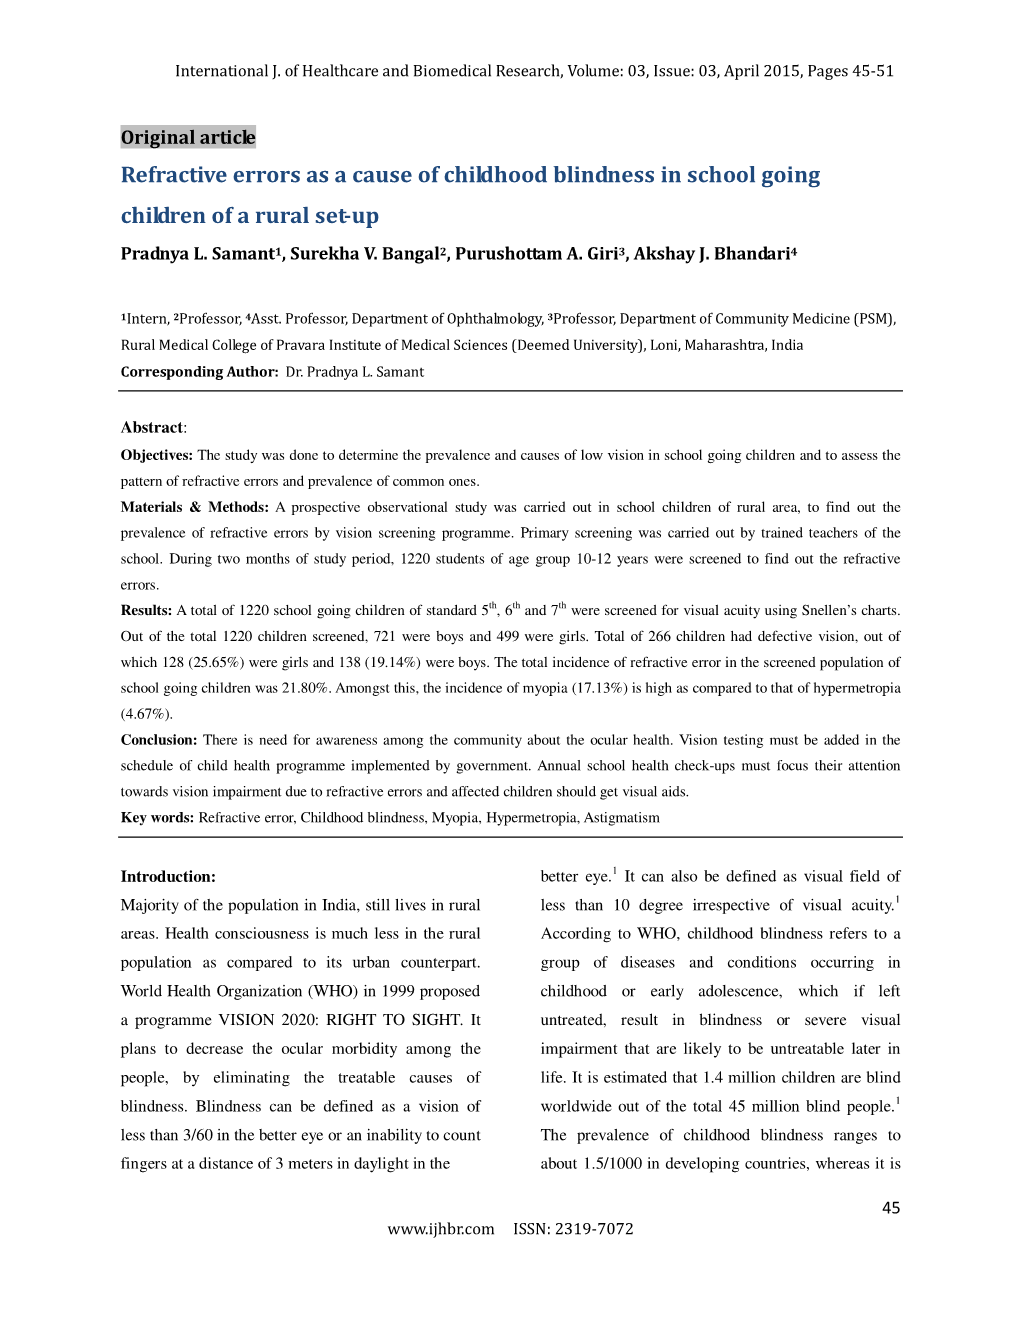 Refractive Errors As a Cause of Childhood Blindness in School Going Children of a Rural Set-Up